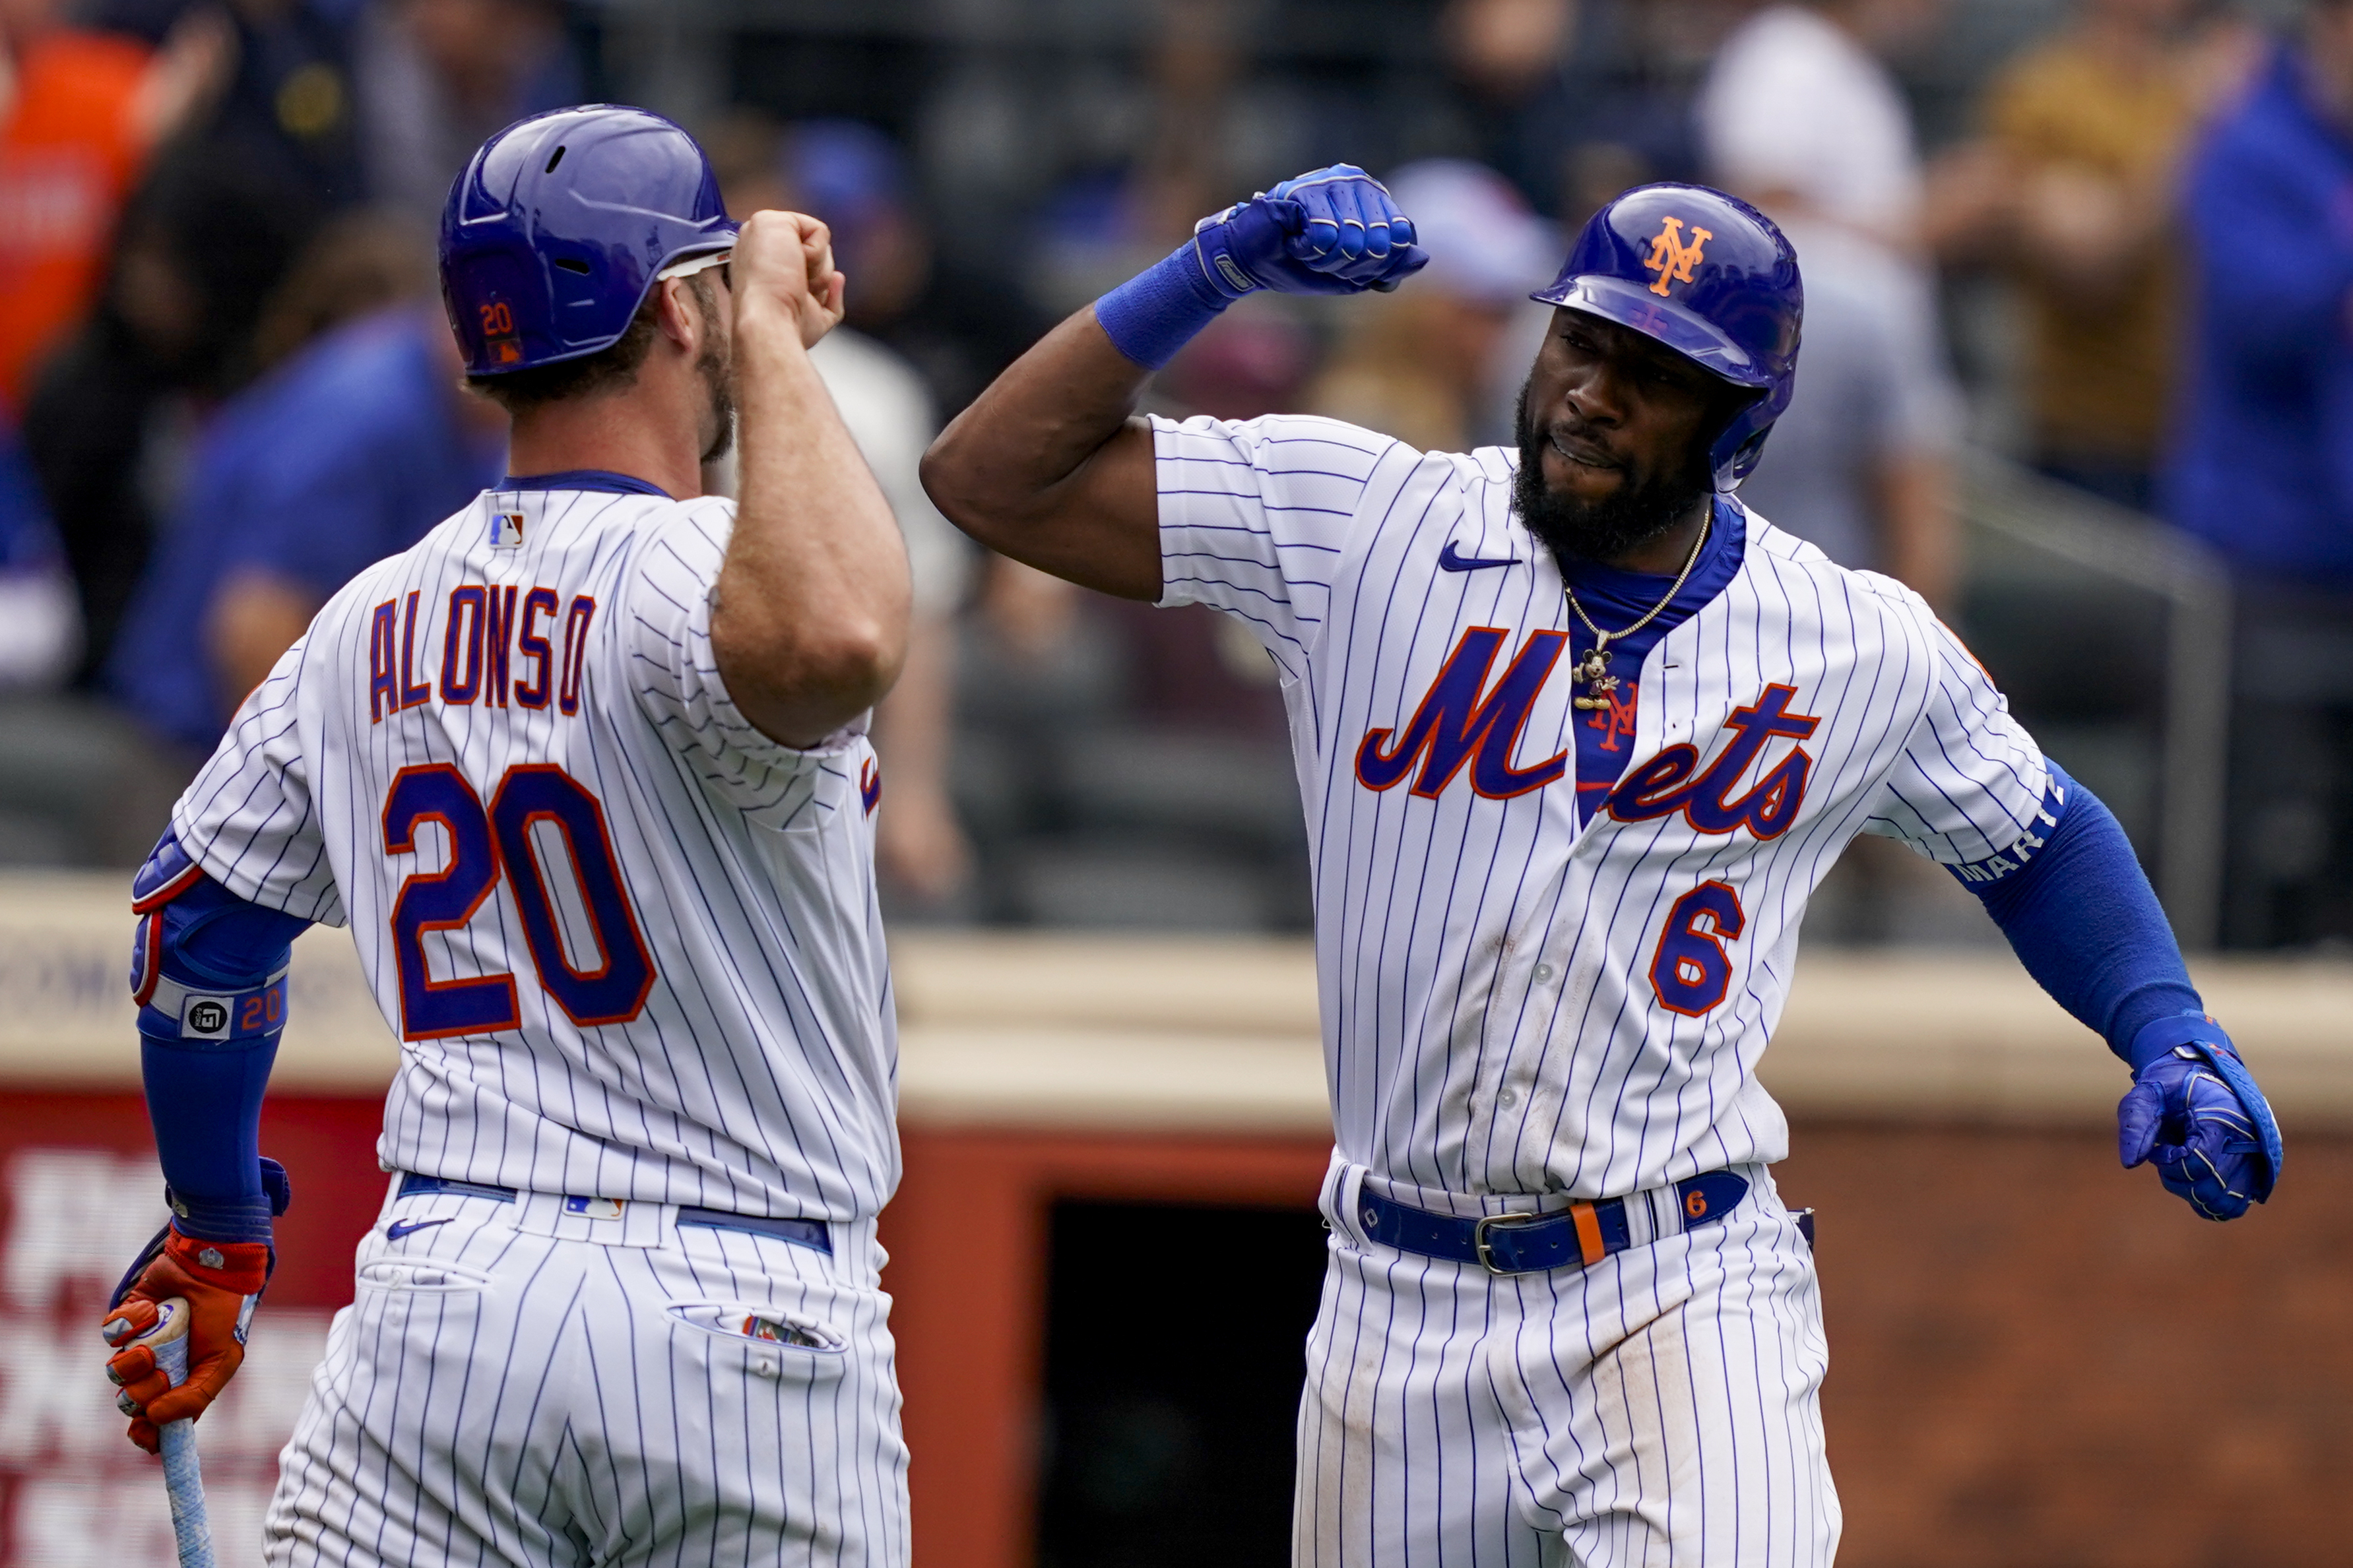 How to Watch the Giants vs. Mets Game: Streaming & TV Info